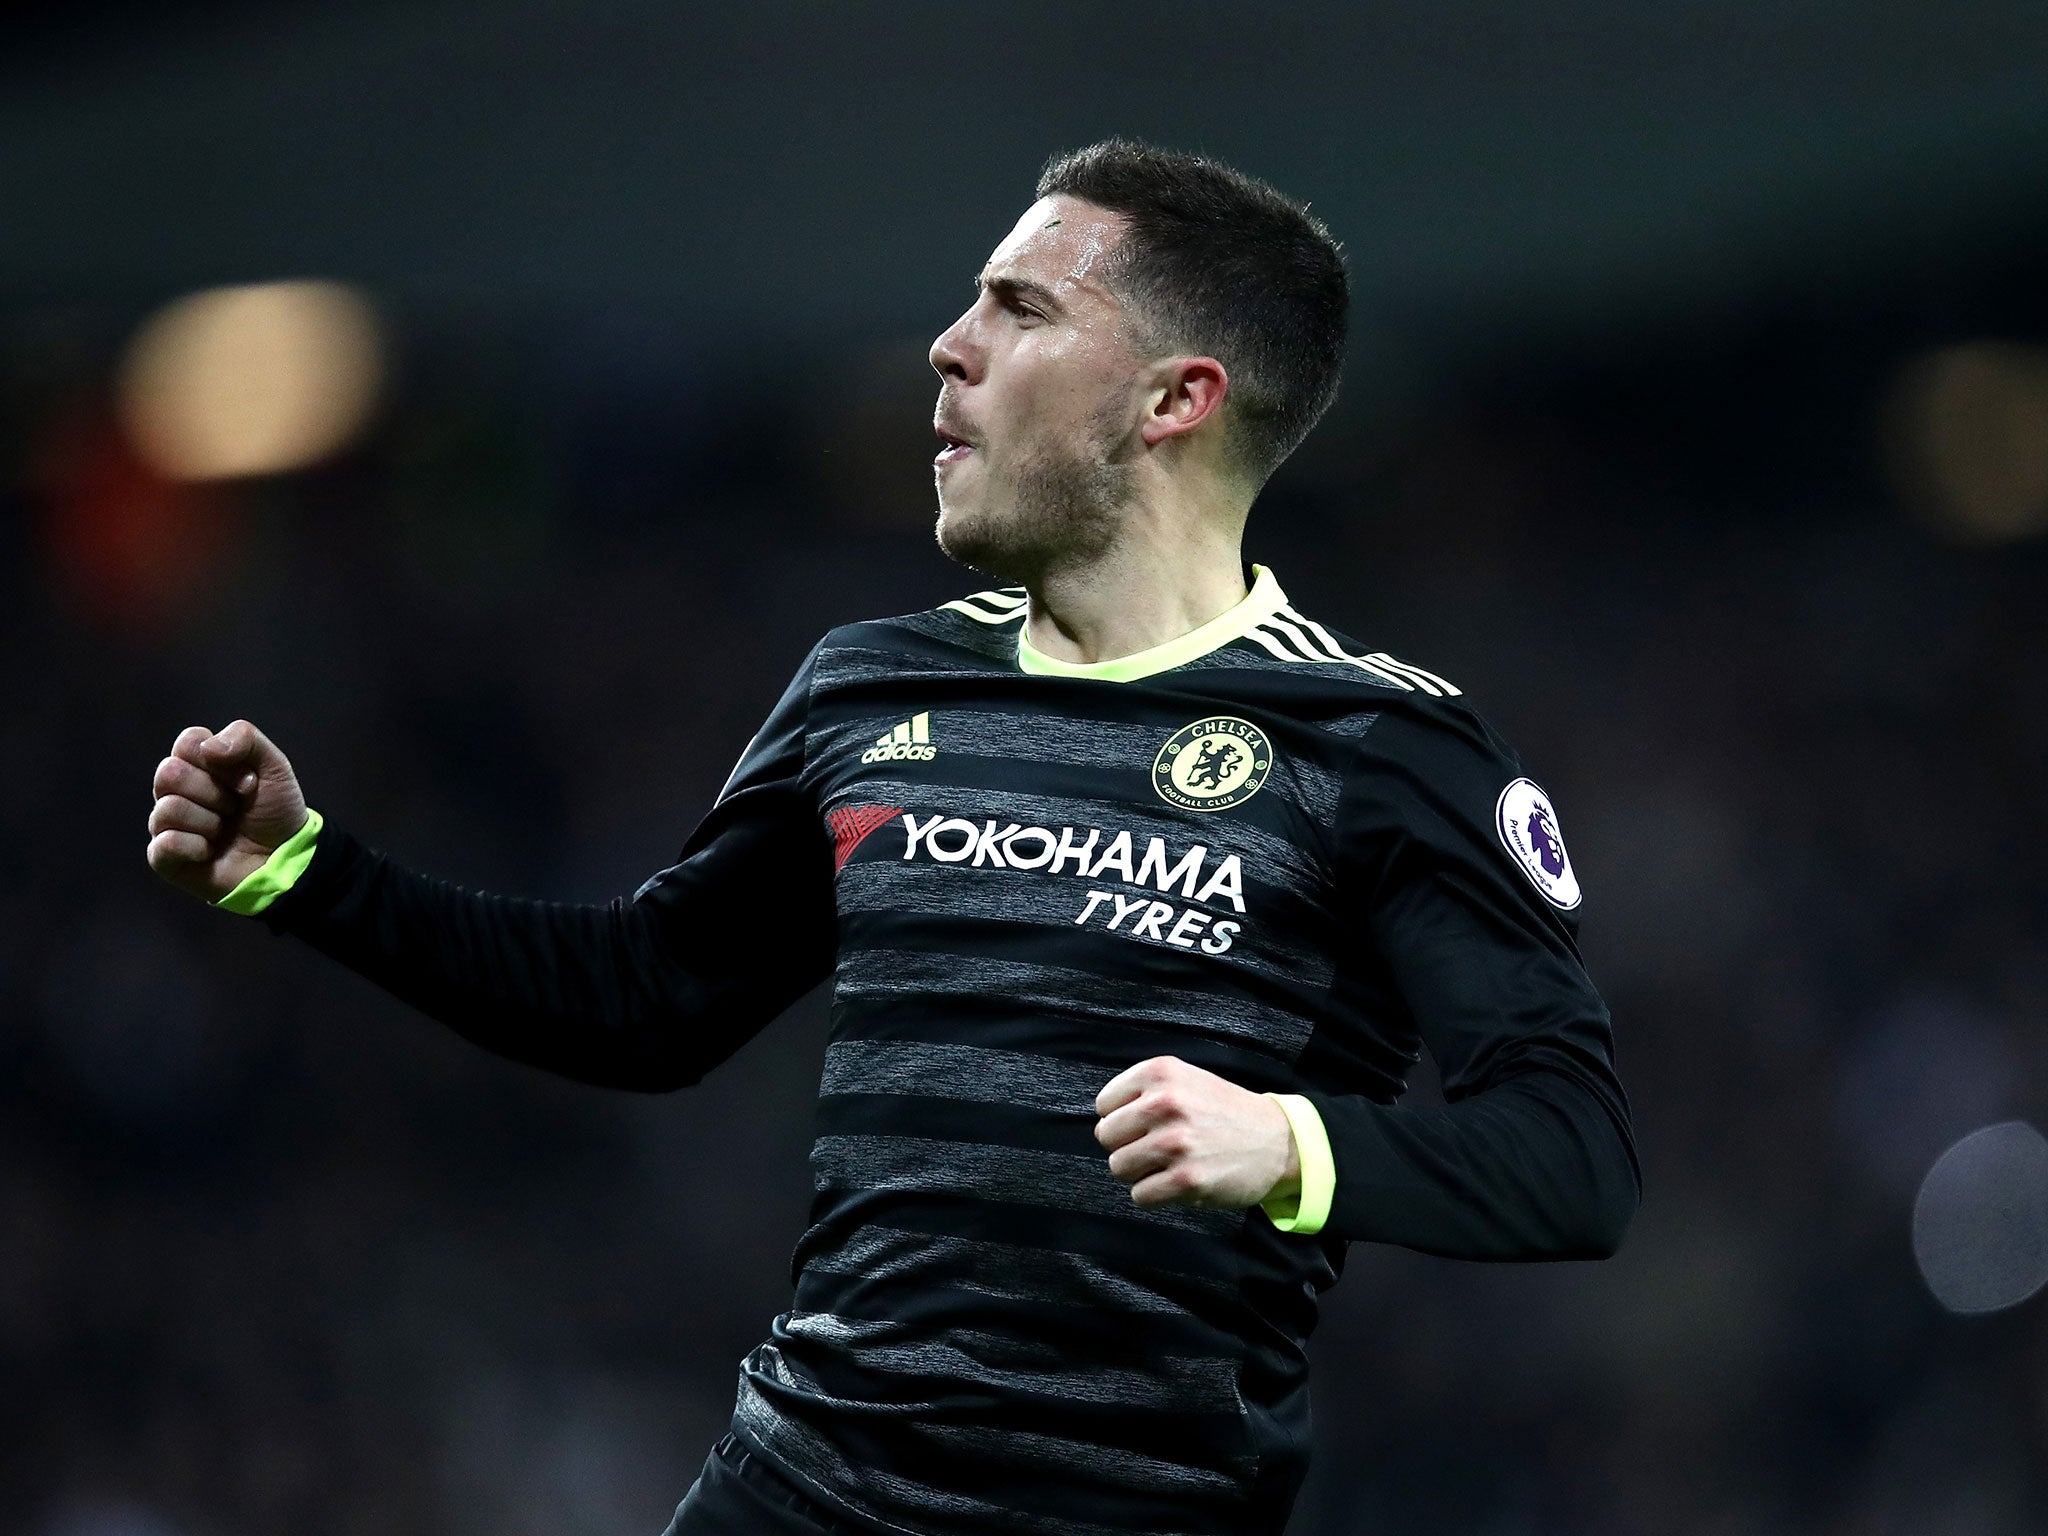 Eden Hazard has once again established himself as one of Chelsea's key players